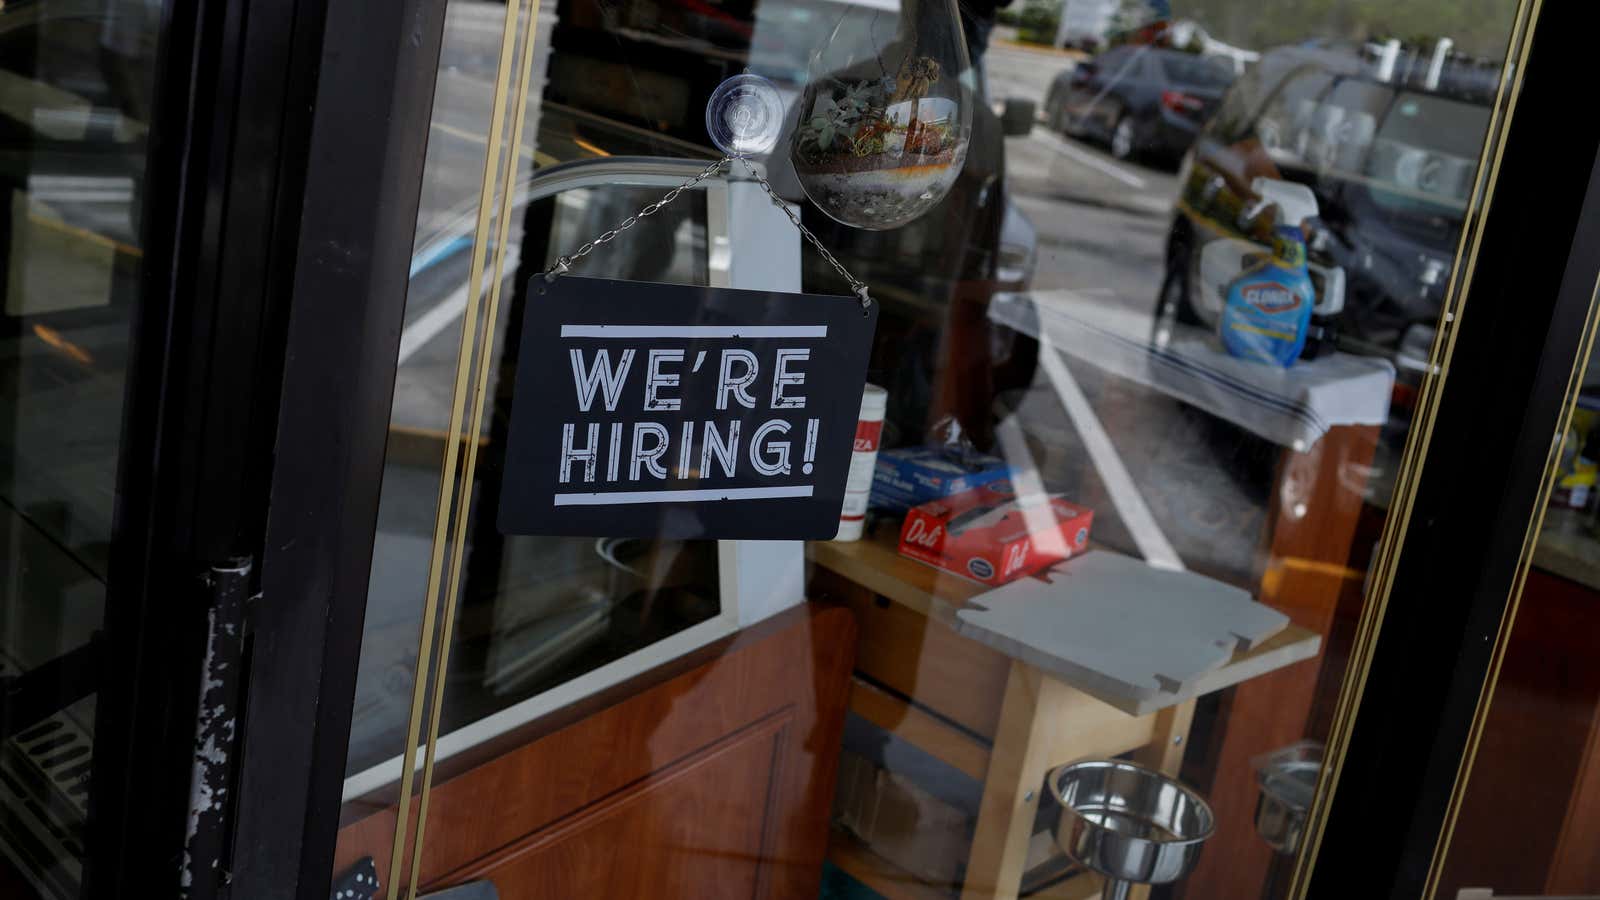 A sign hangs in a shop window reading “We’re hiring!”